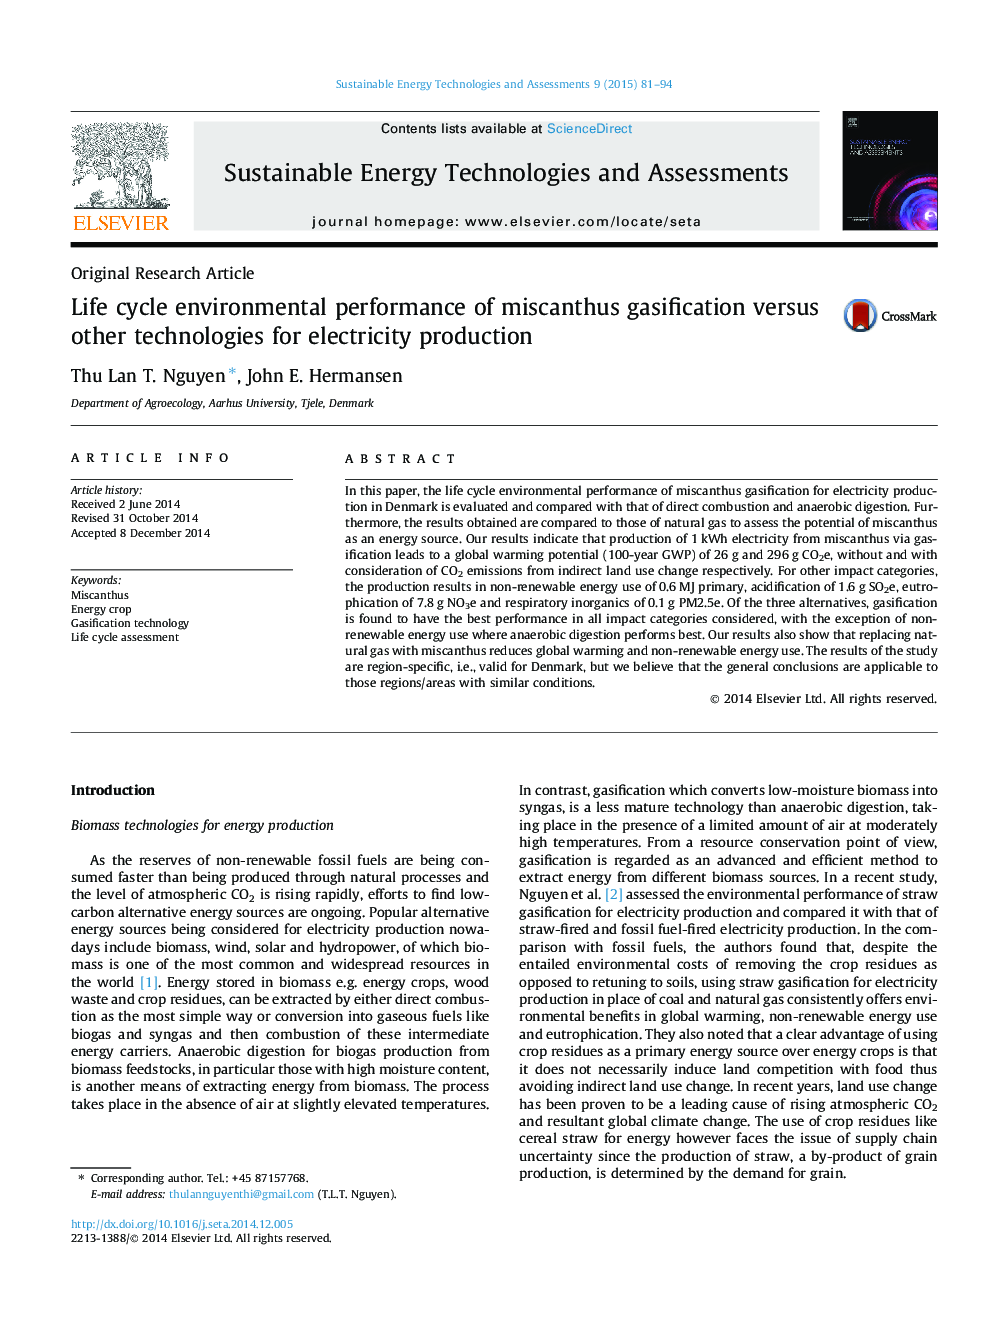 Life cycle environmental performance of miscanthus gasification versus other technologies for electricity production